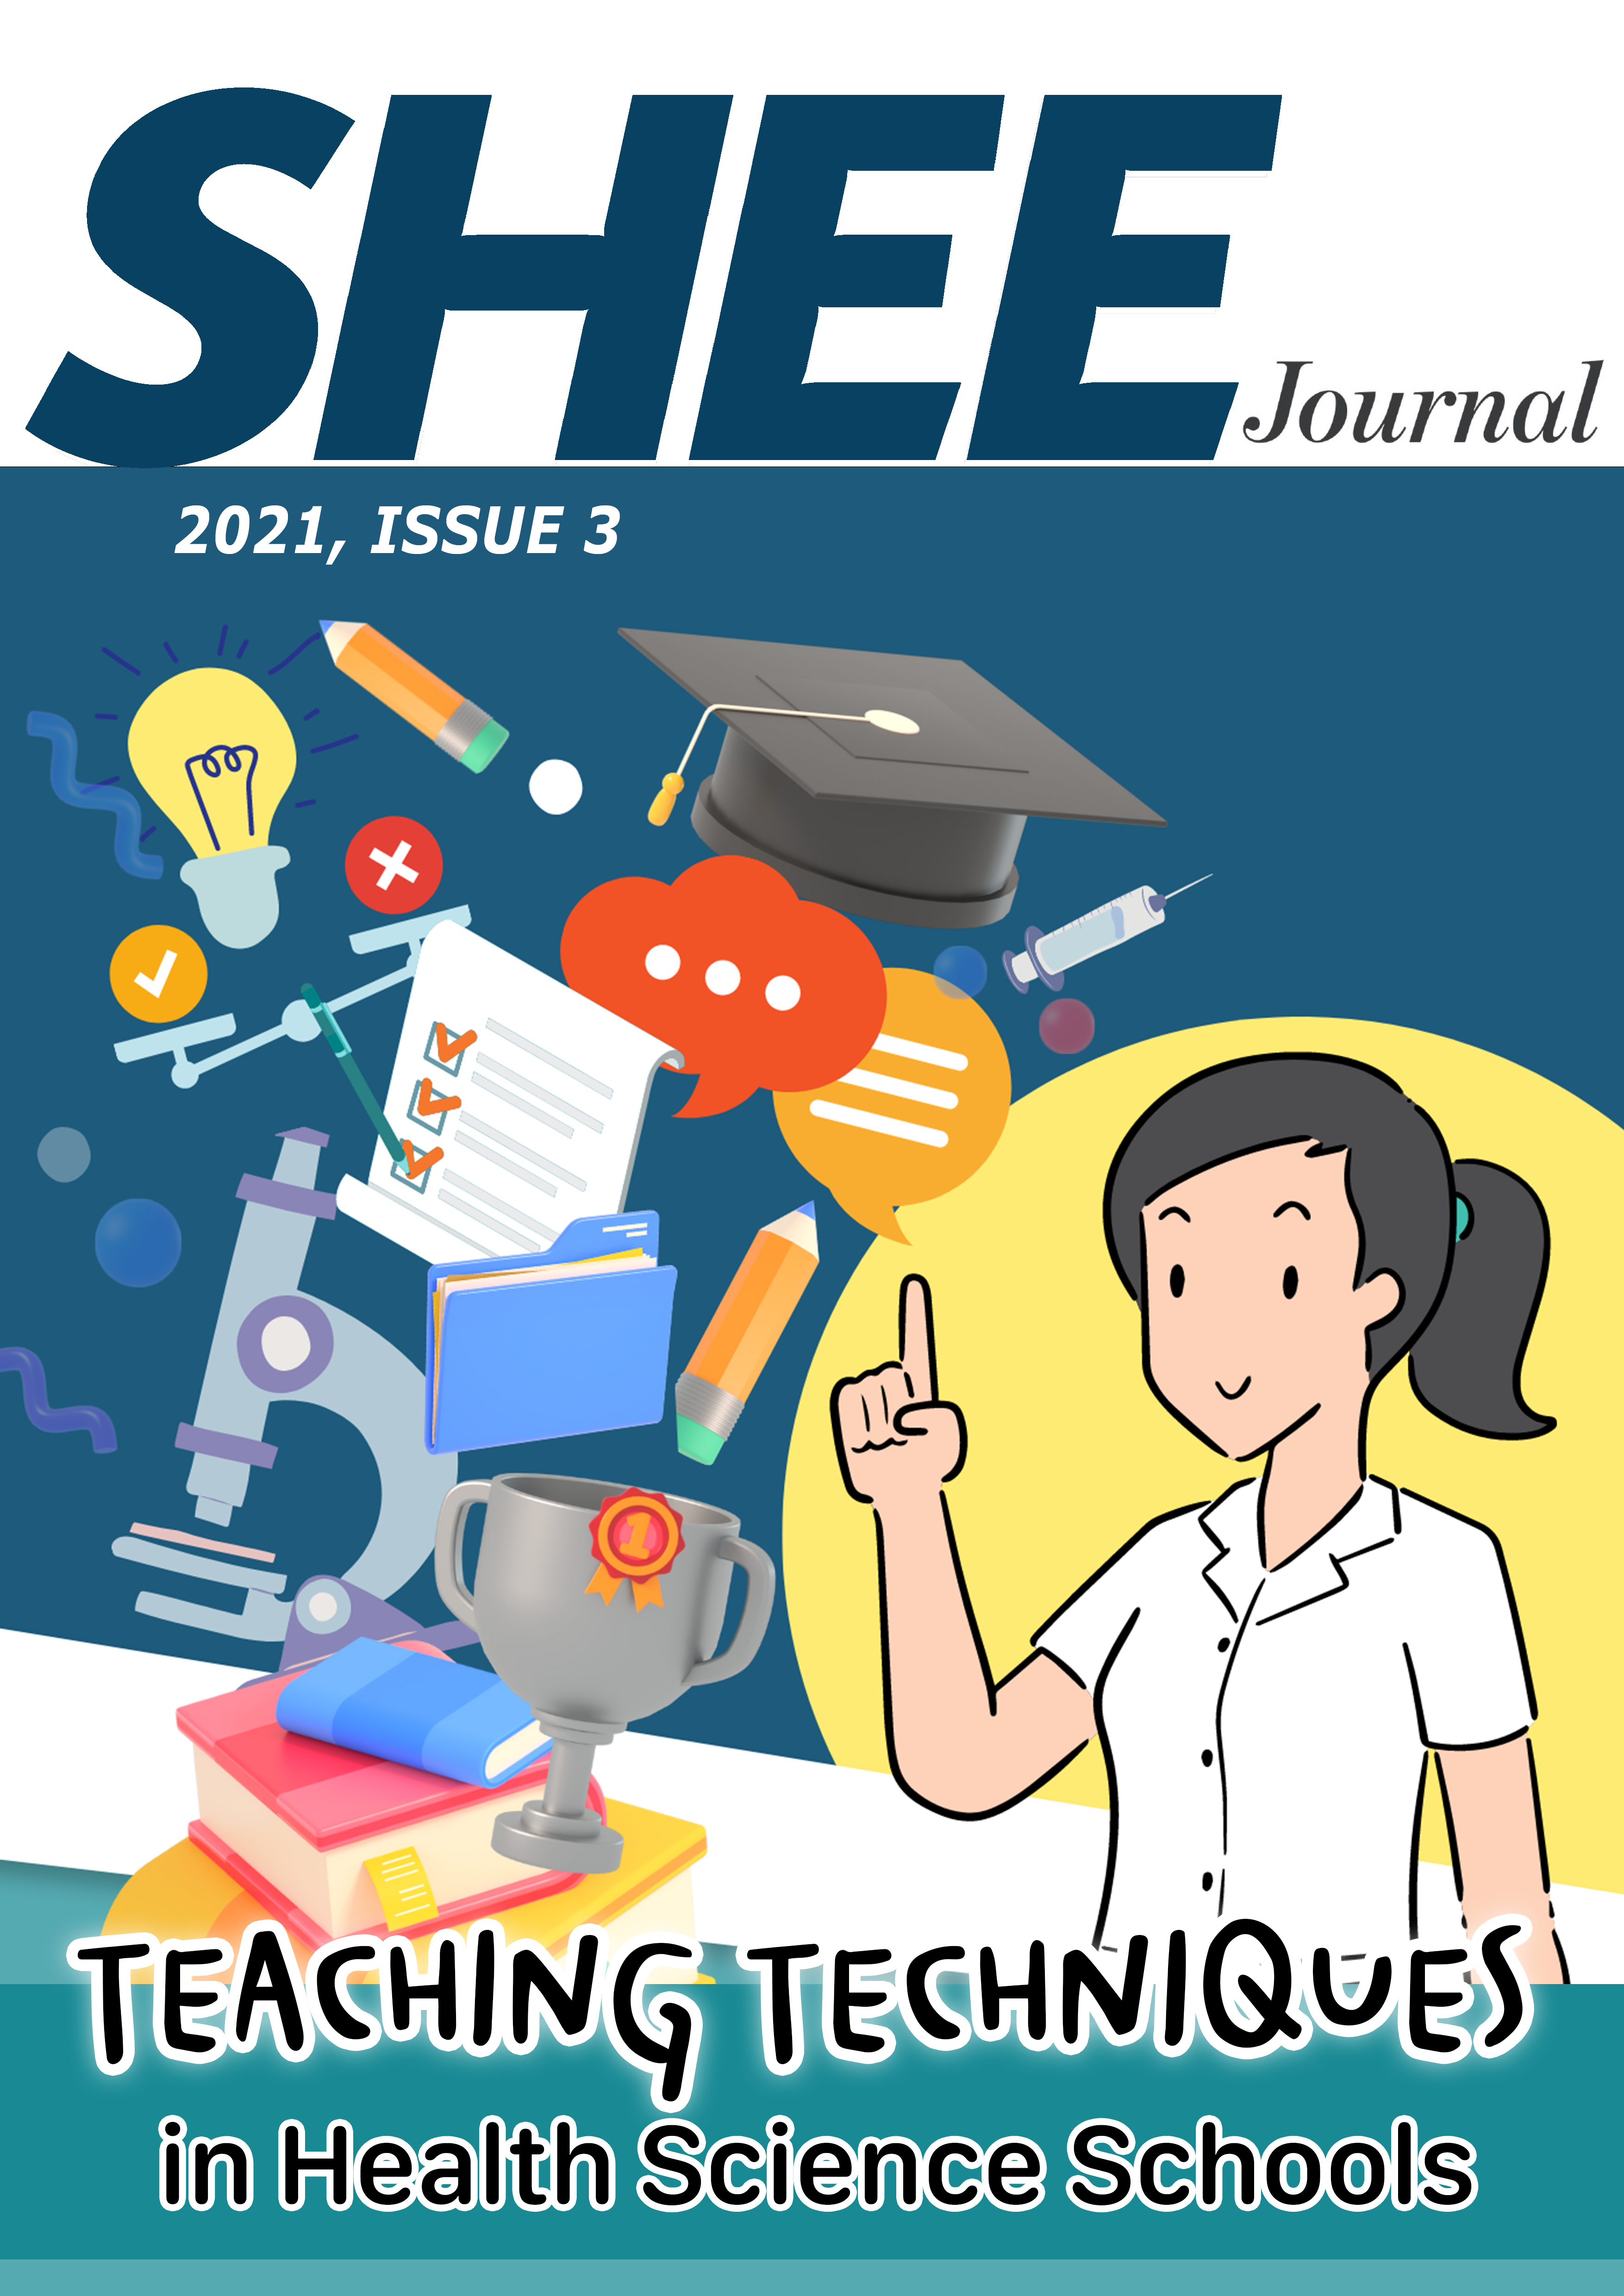 Journal Issue 3, 2021 เรื่อง Teaching techniques in health science schools